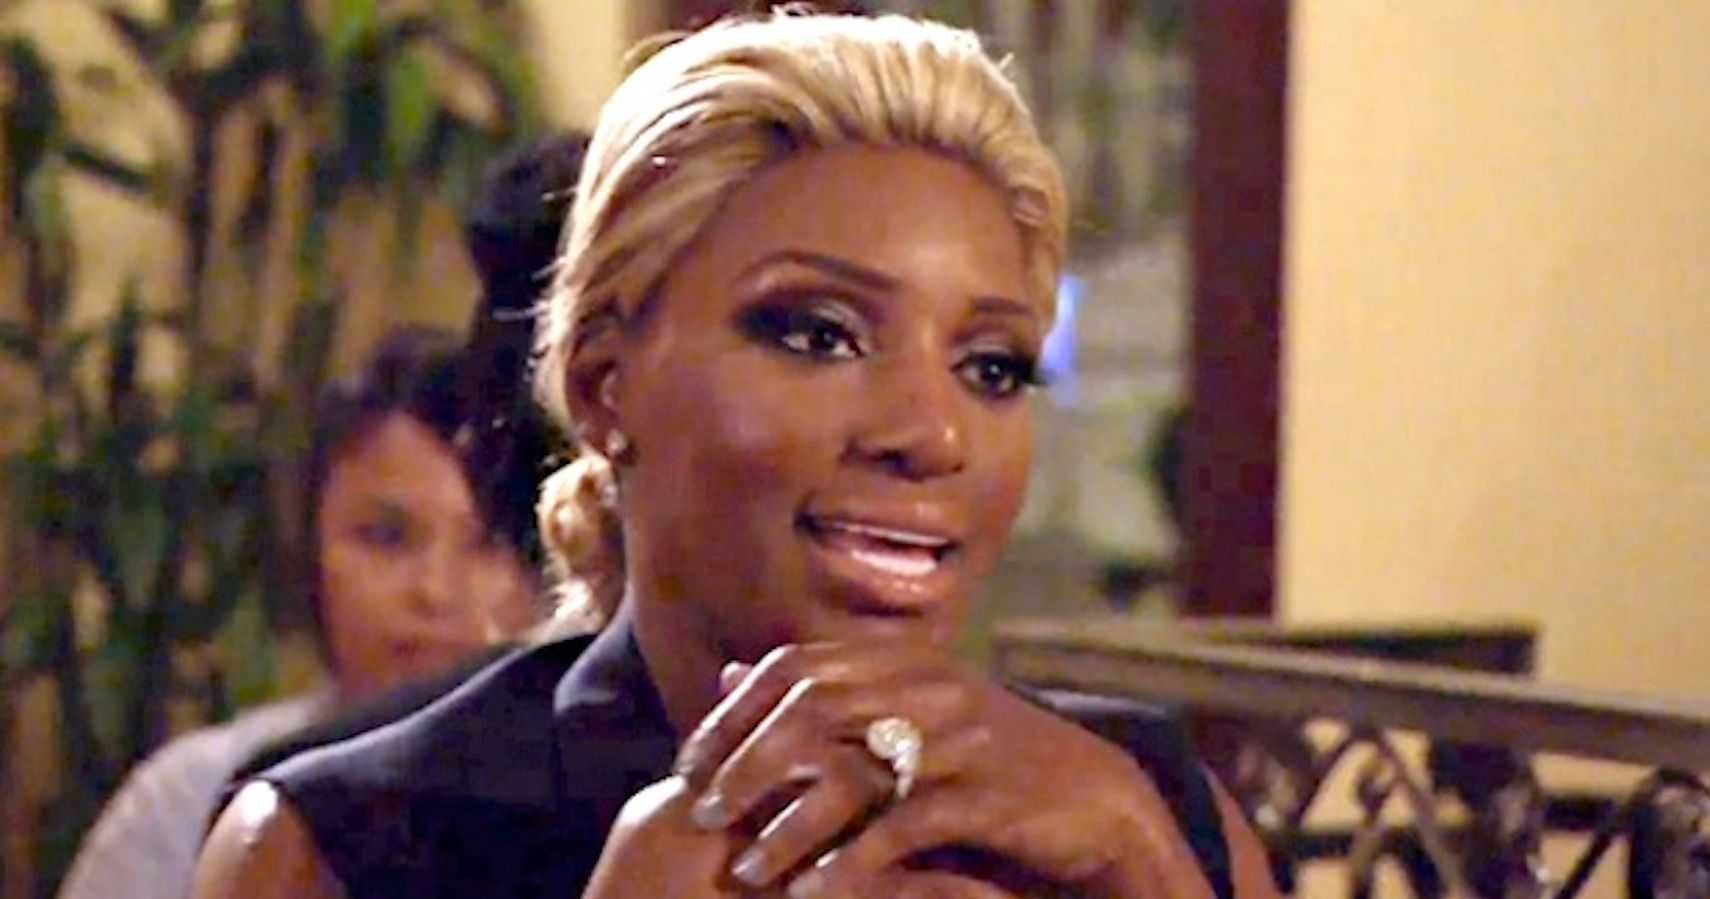 RHOA NeNe Leakes Has Twitter Meltdown During Contract Negotiations